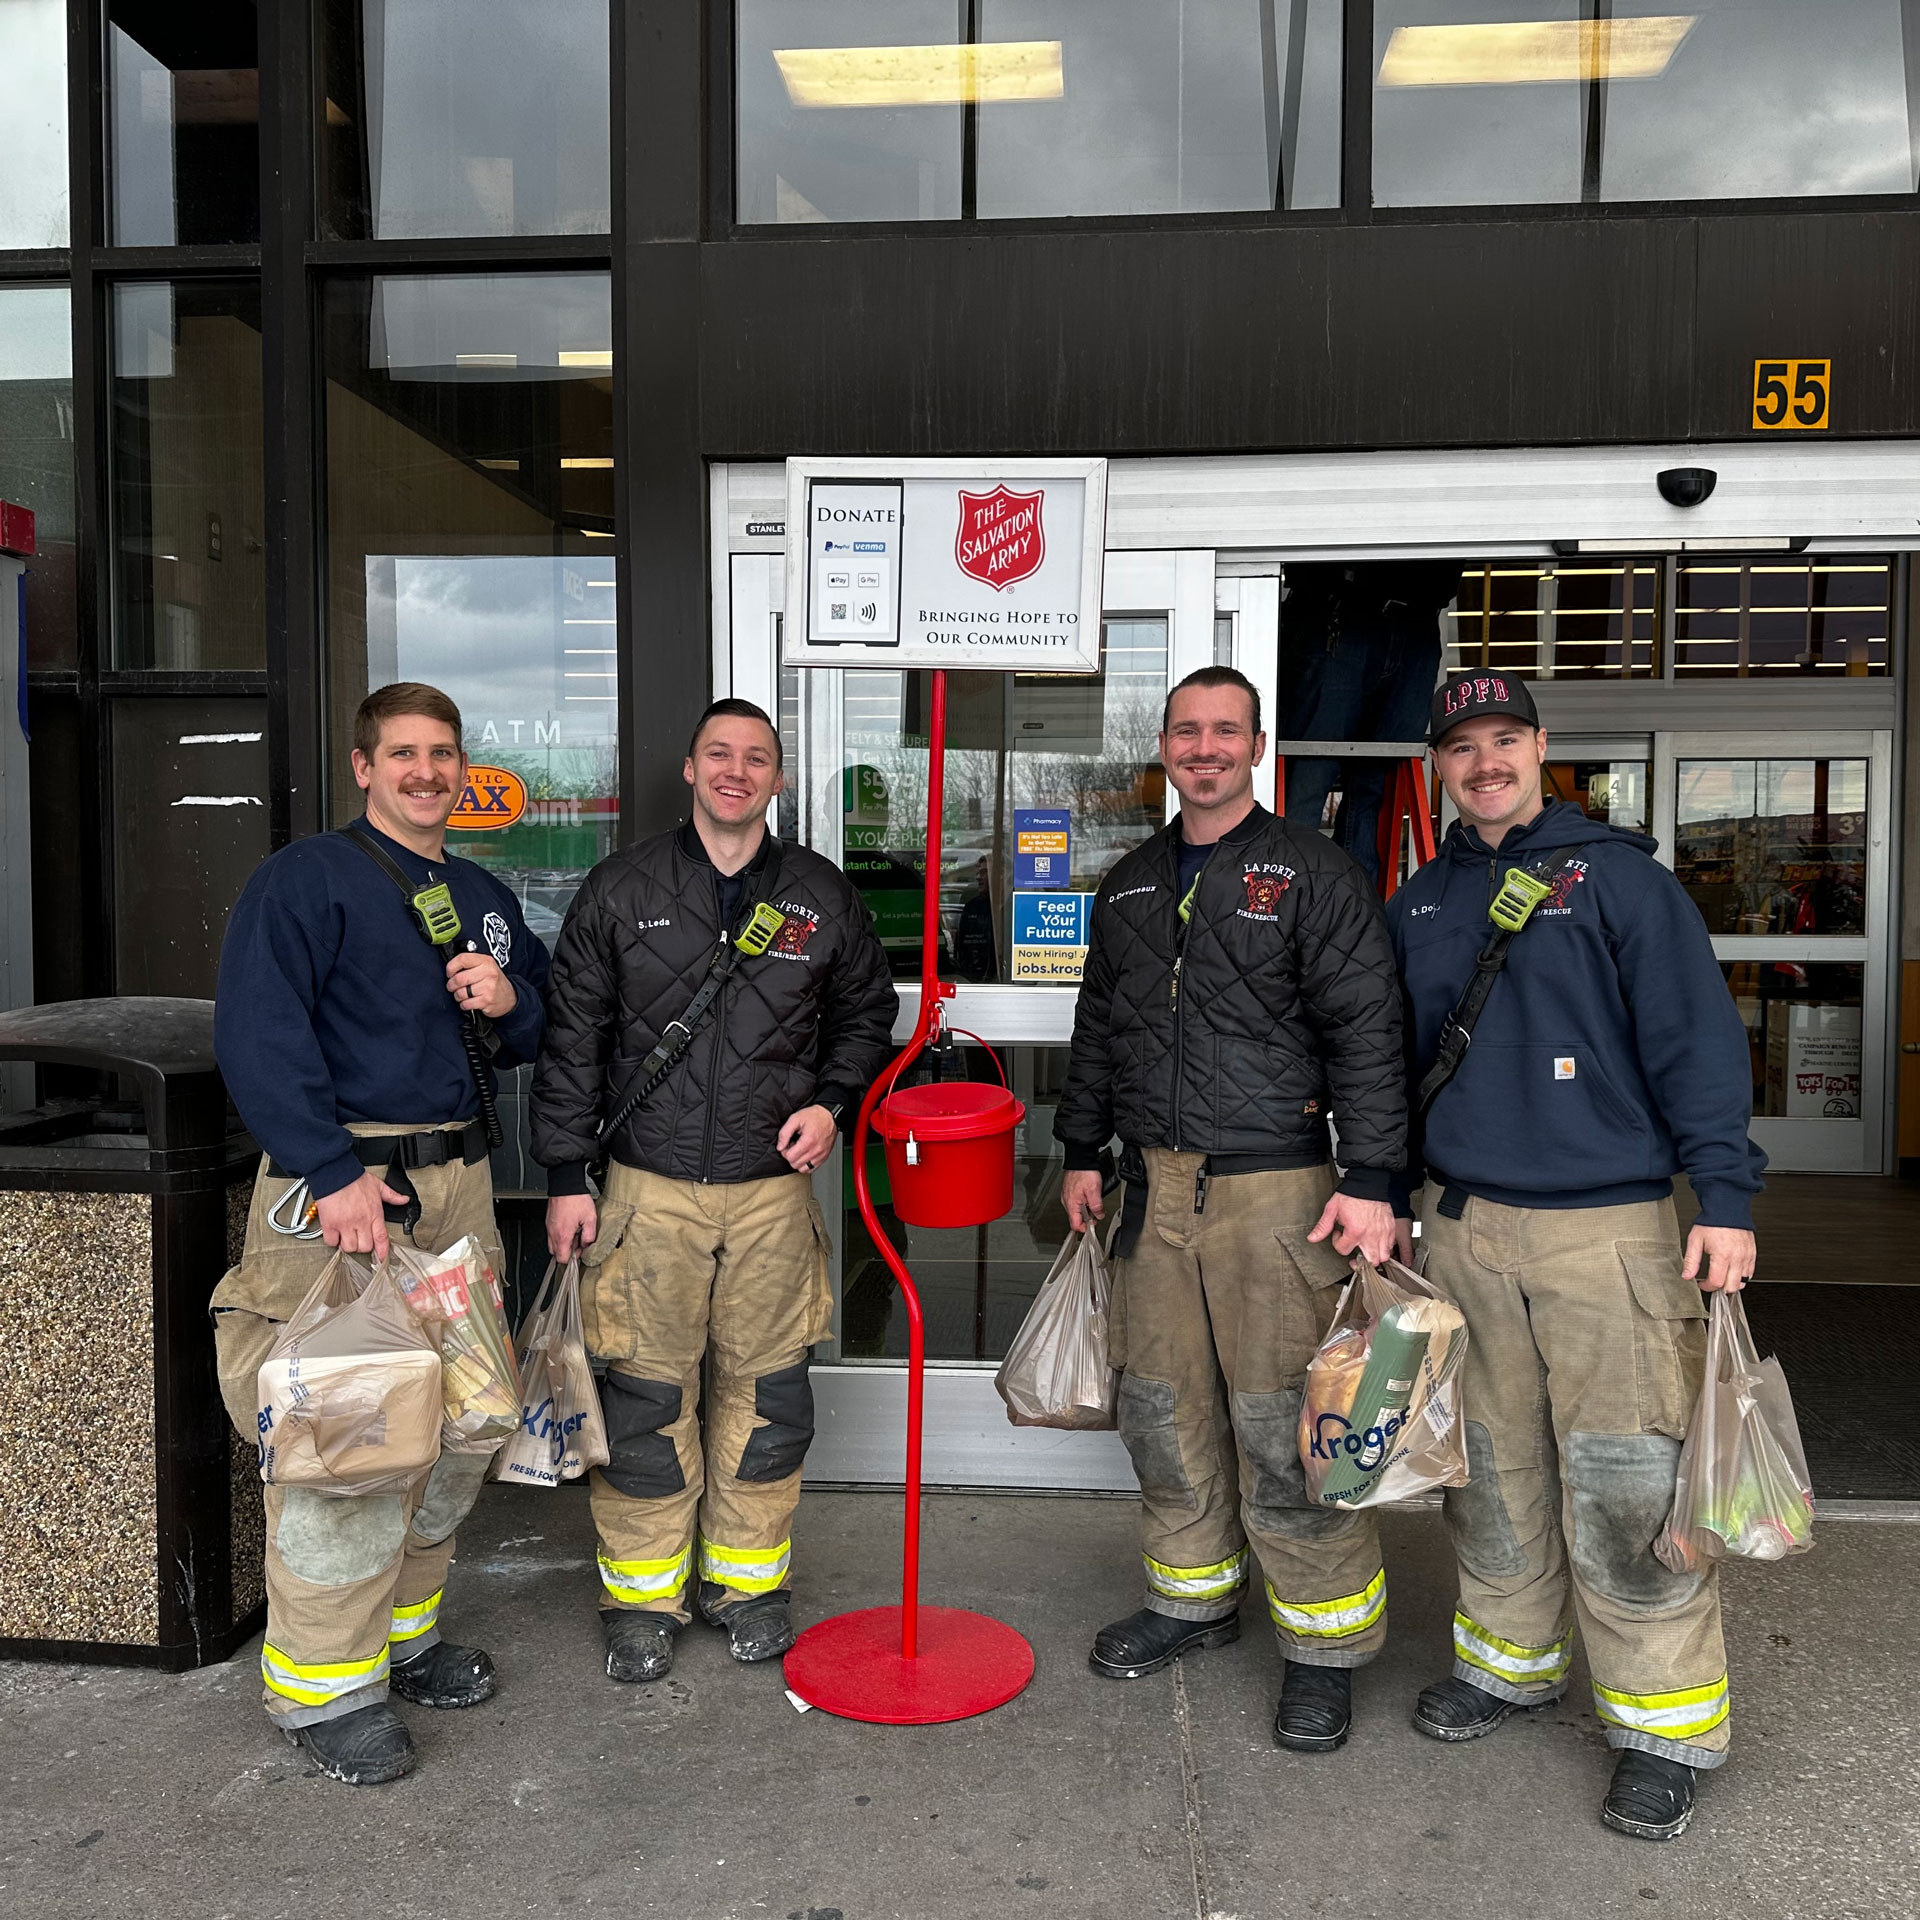 Fire Department donating to The Salvation Army